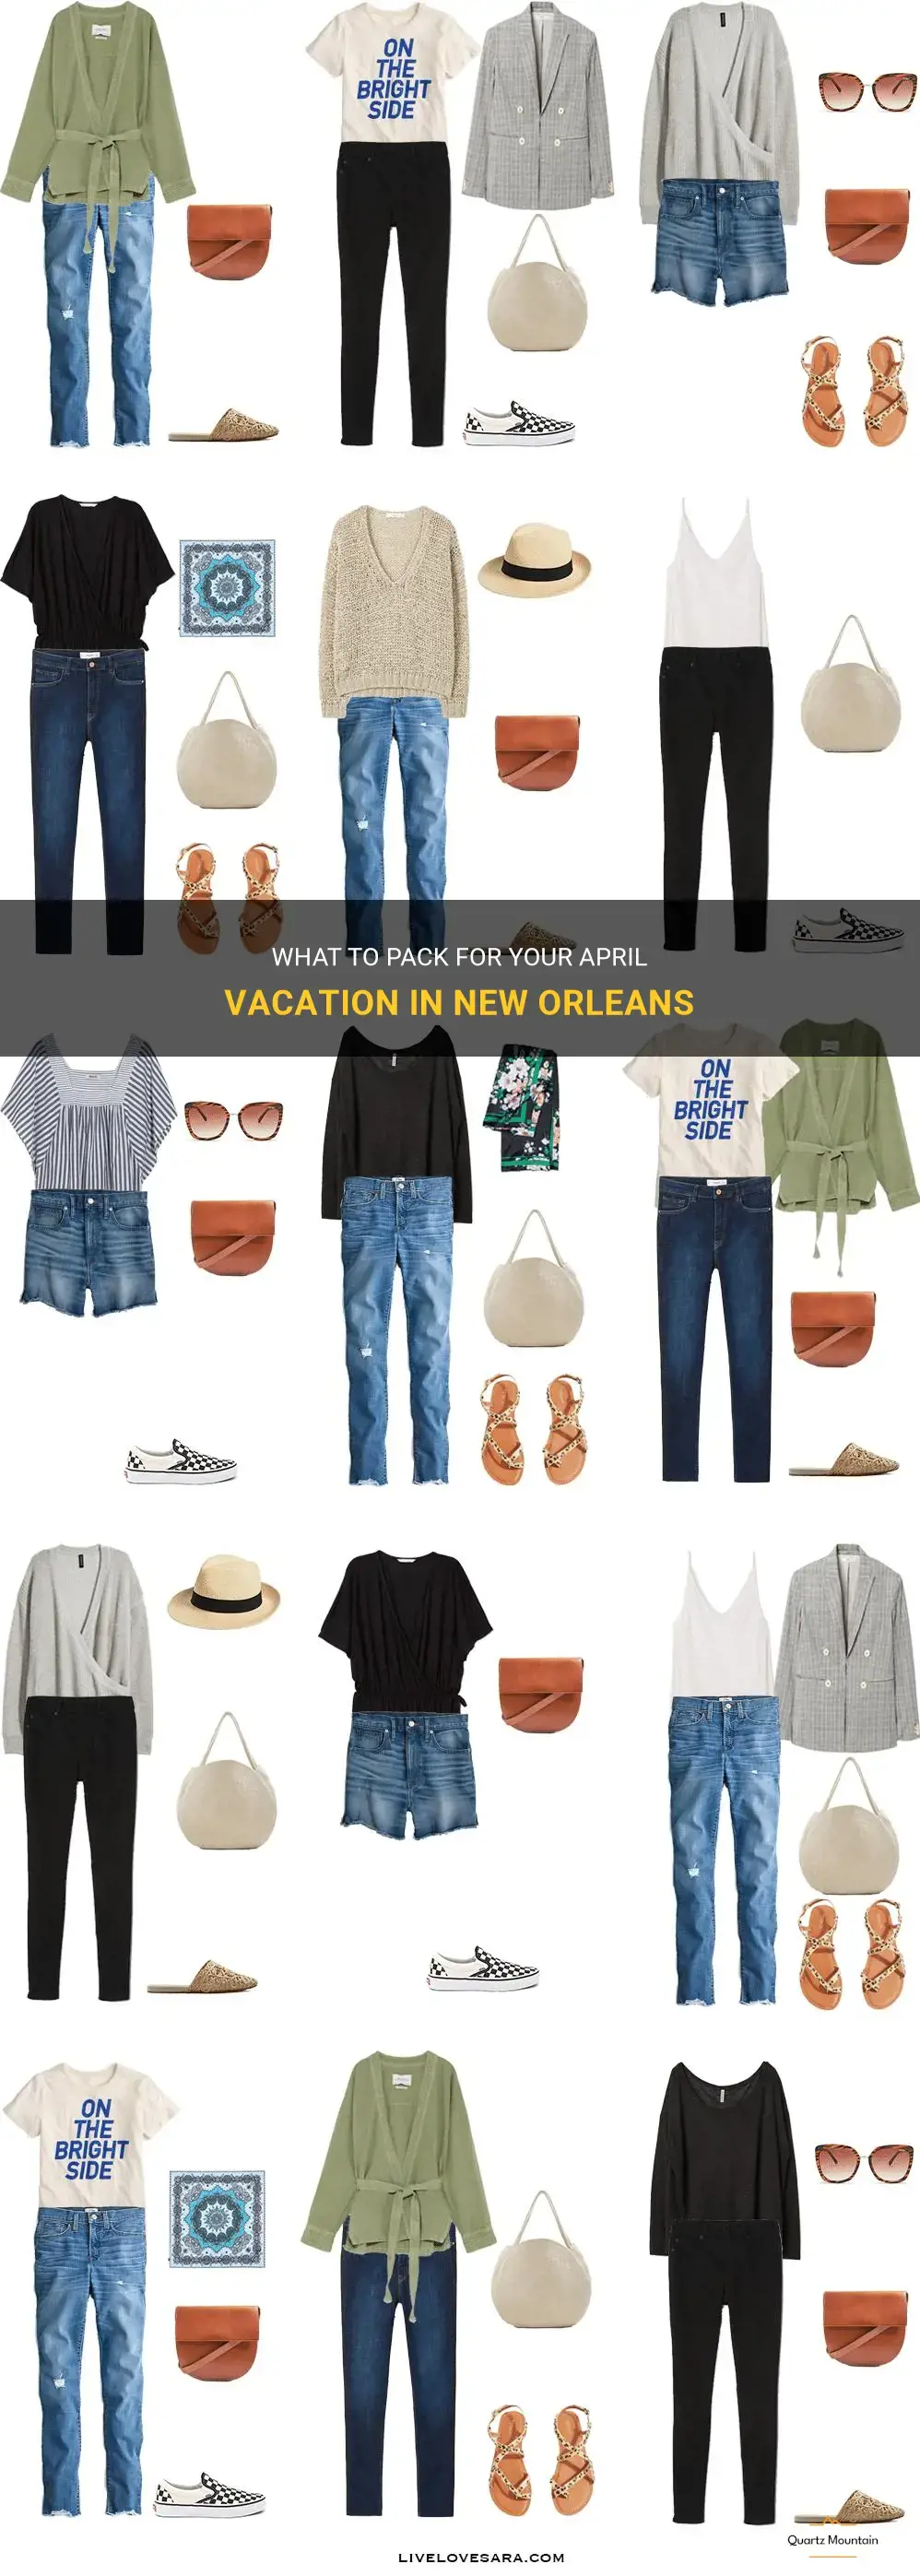 what to pack for vacation to new orleans in april